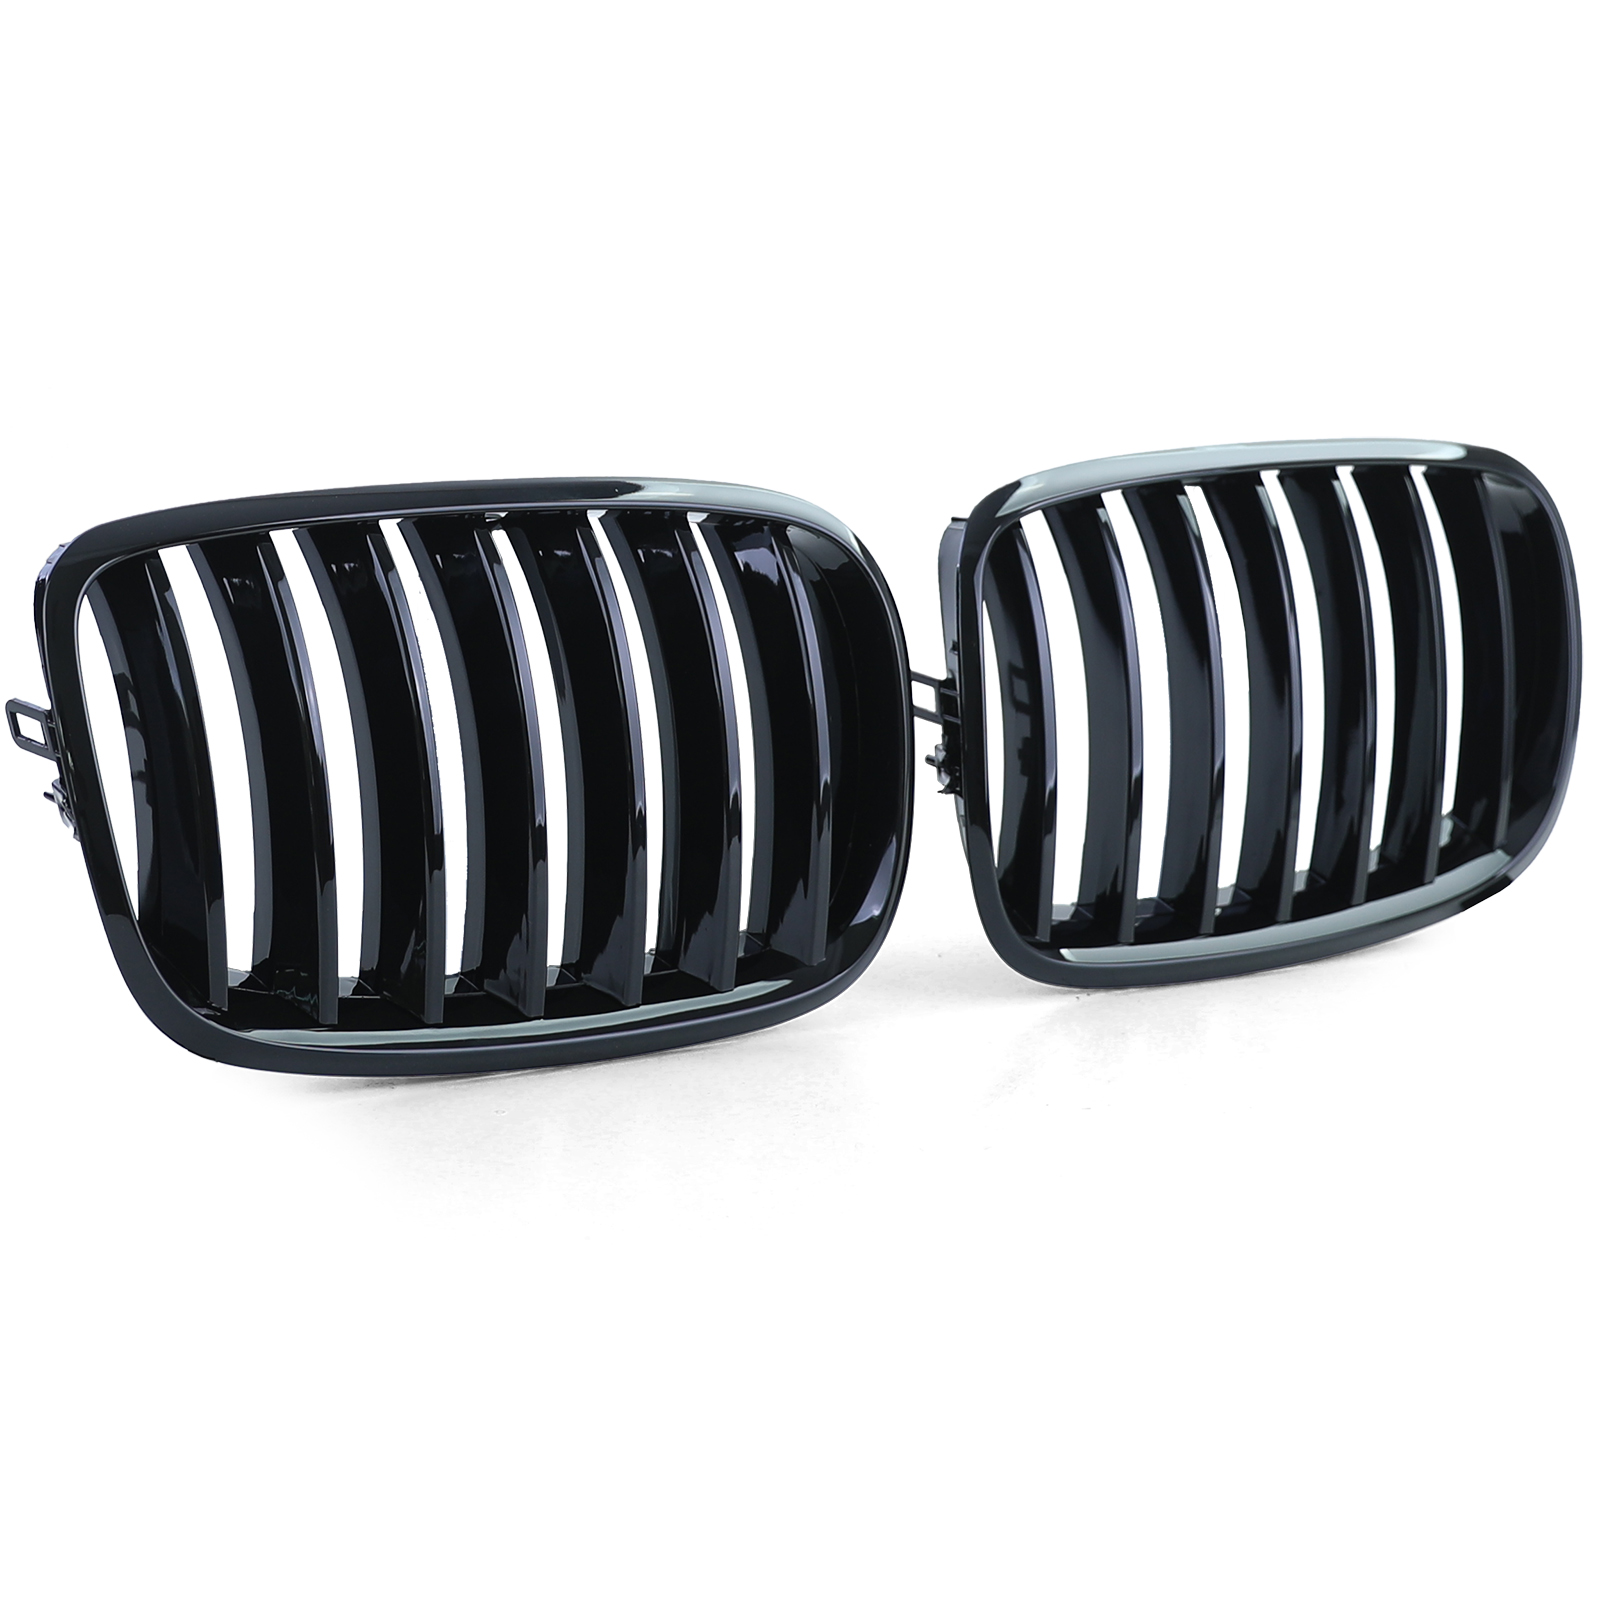 Front grilles kidney for BMW X5/X6 E70/E71 07-14 Performance Black gloss